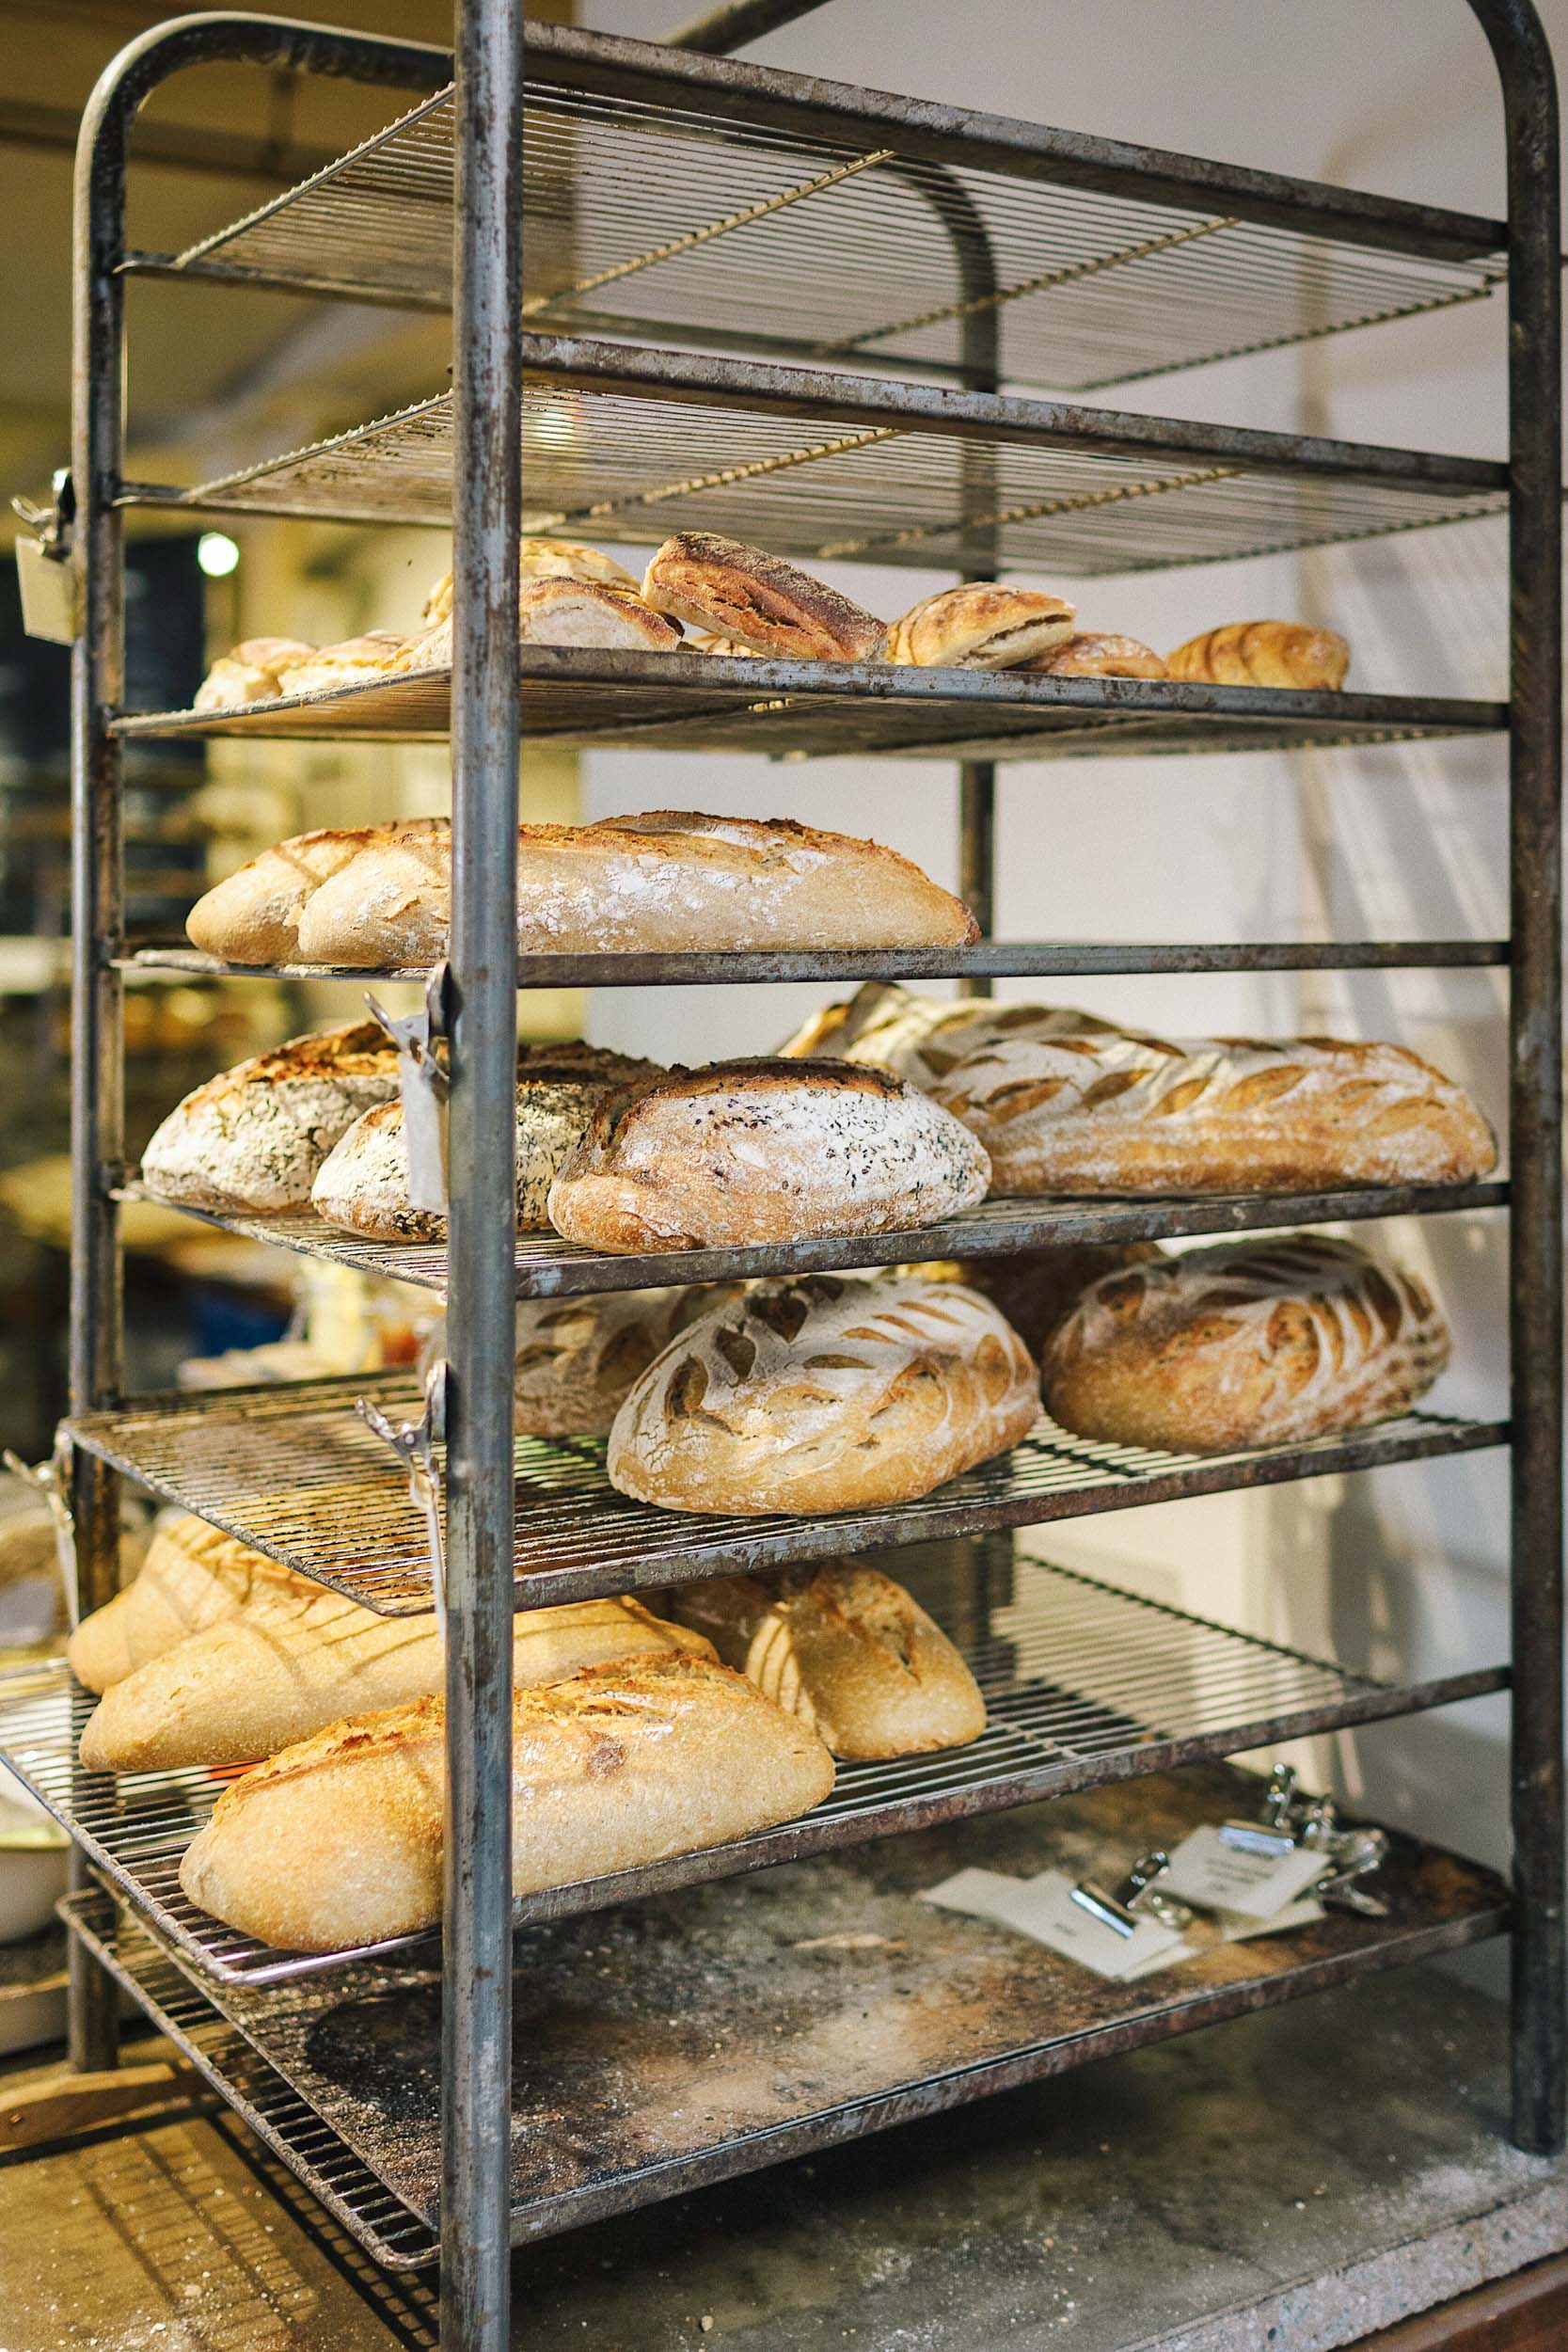 Da Matteo is a great place in Gothenburg to get coffee, a pastry, or some fresh bread